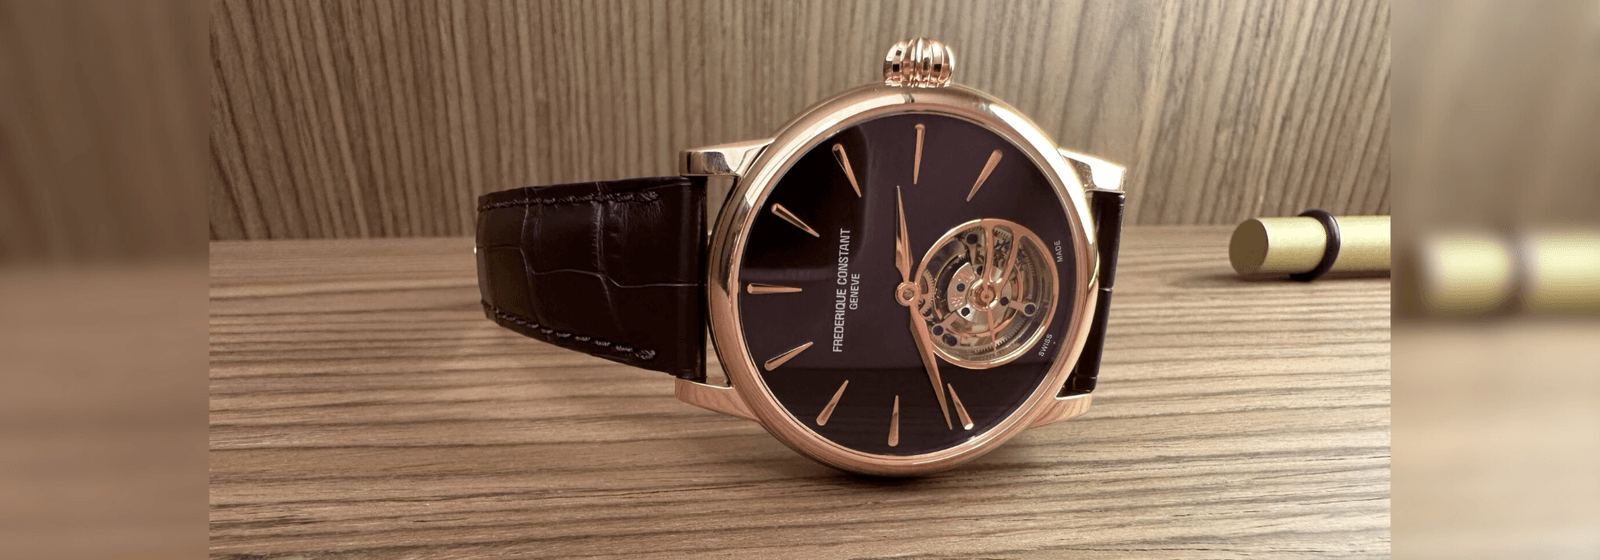 You’ve Been Put On Notice - Frederique Constant’s Classic Manufacture Tourbillon To The Watchworld